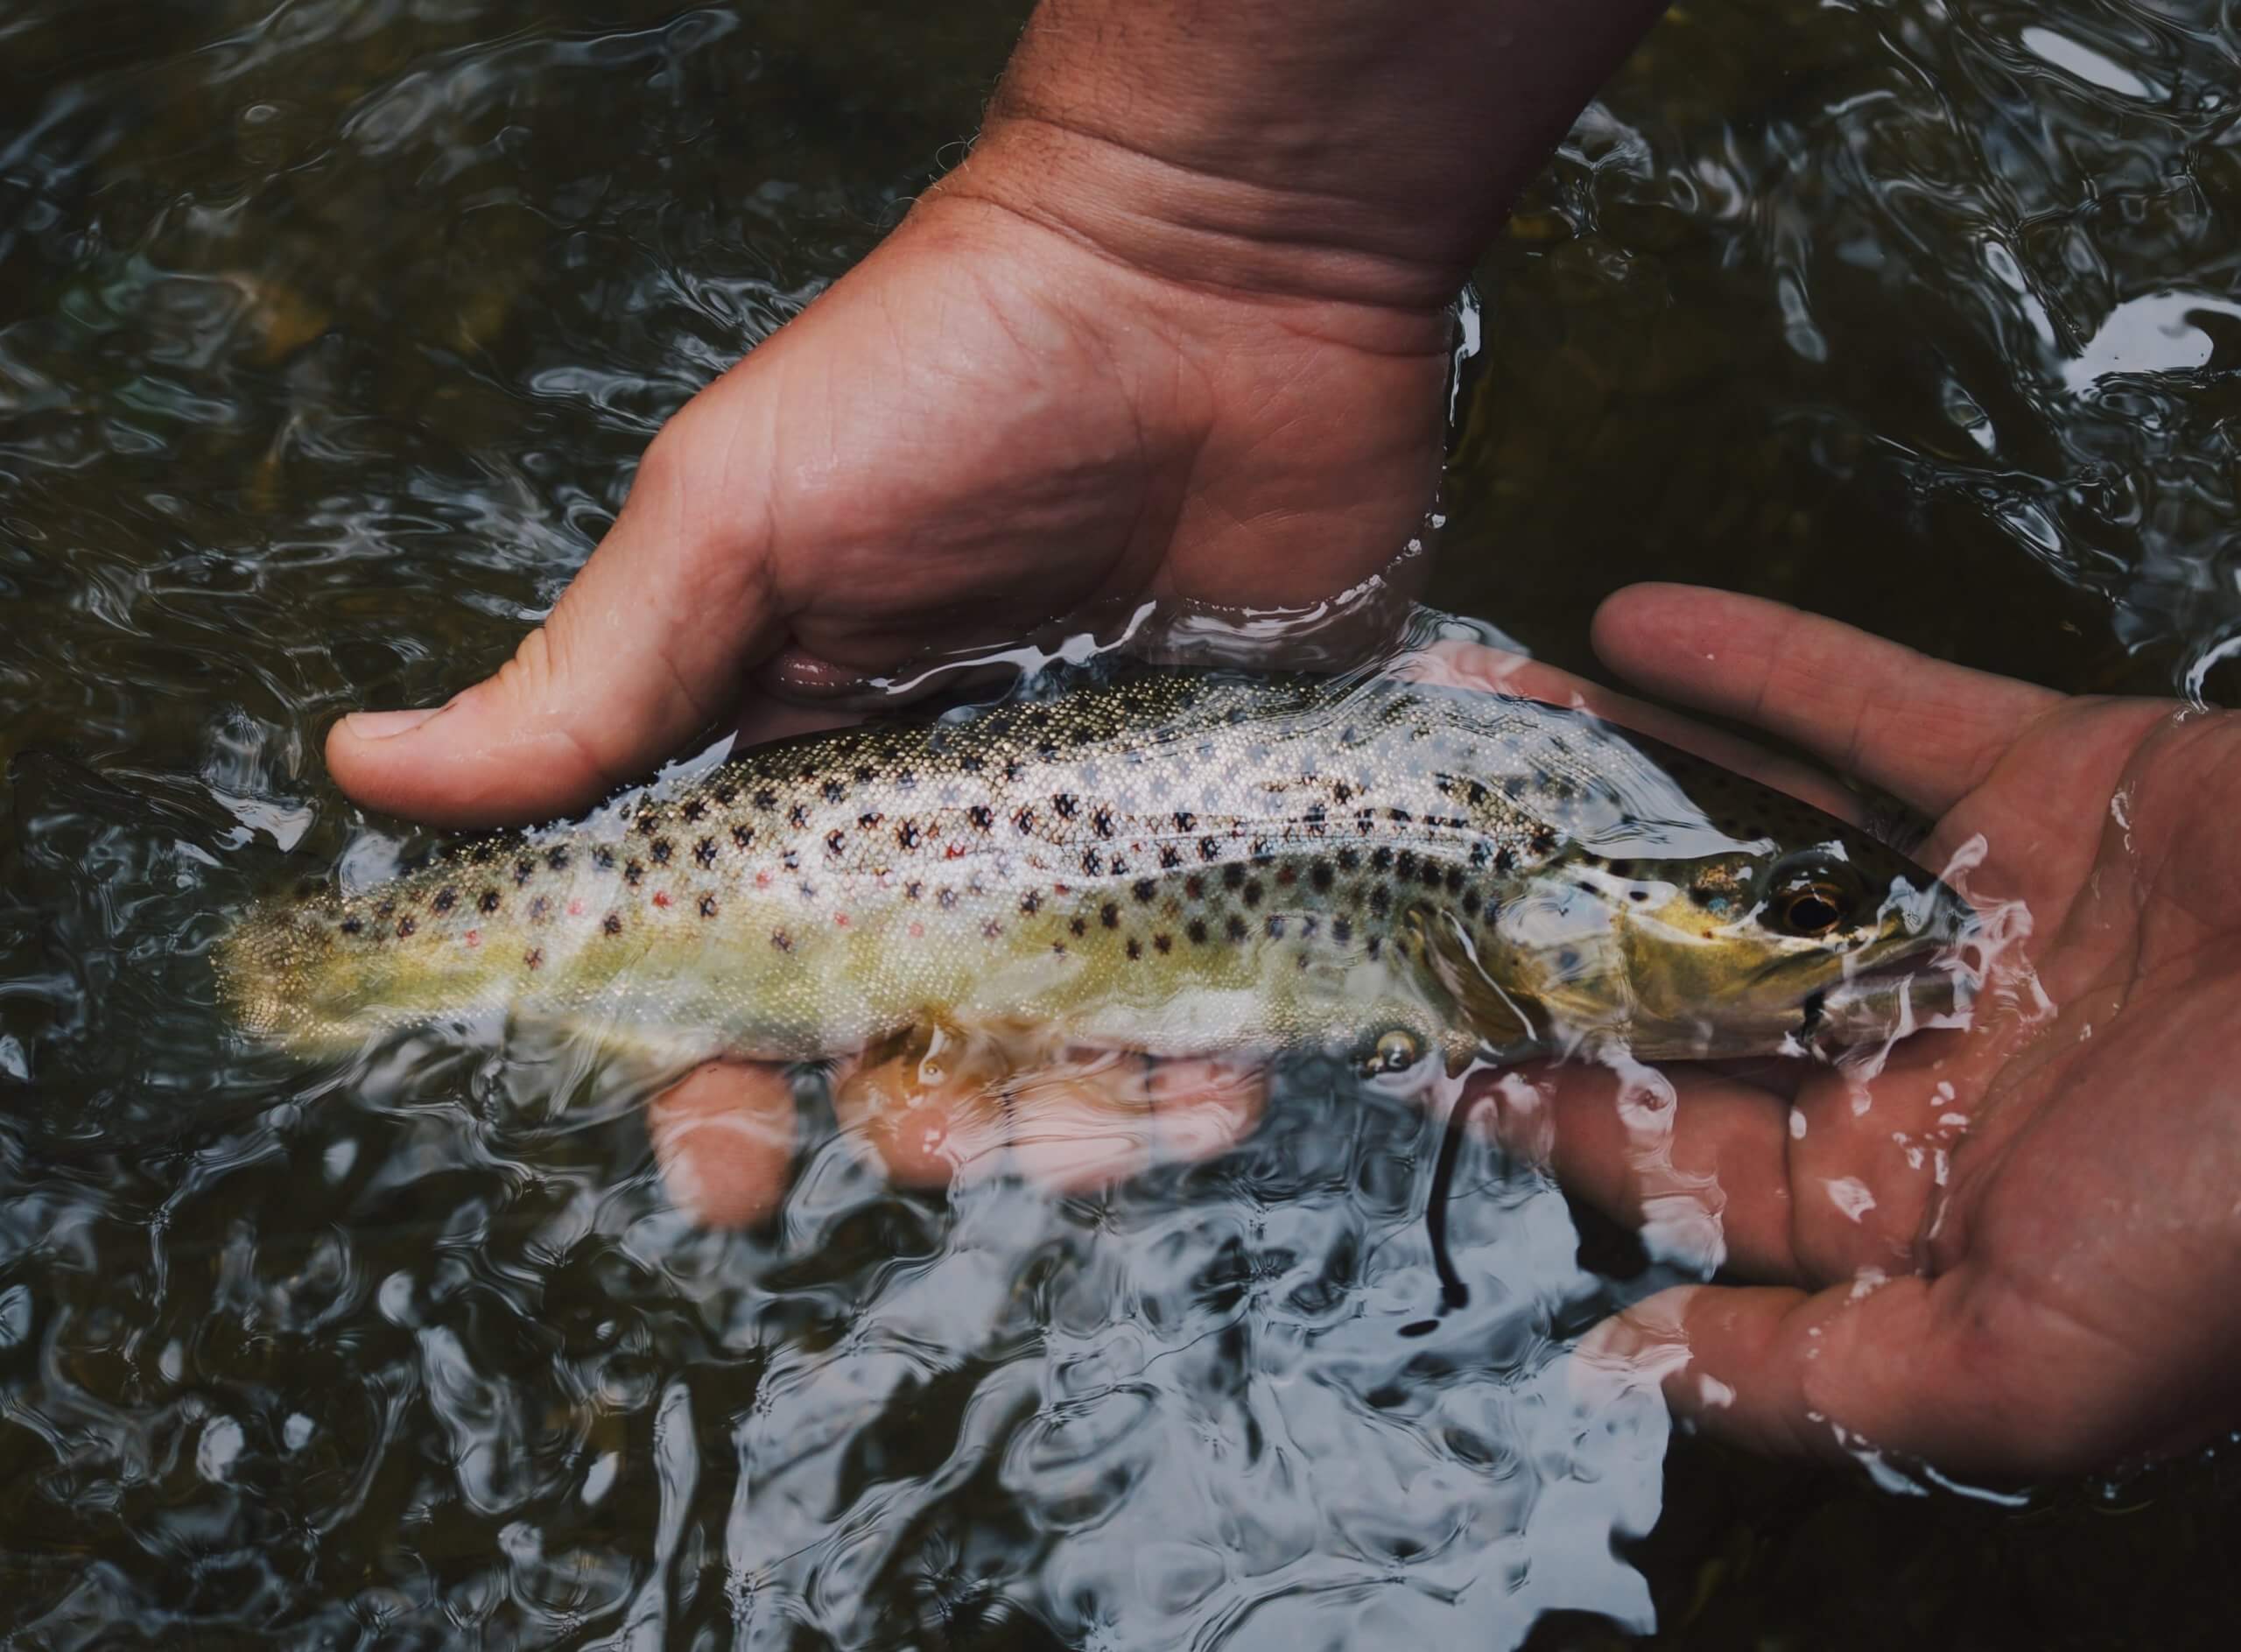 A trout being held in water by two hands